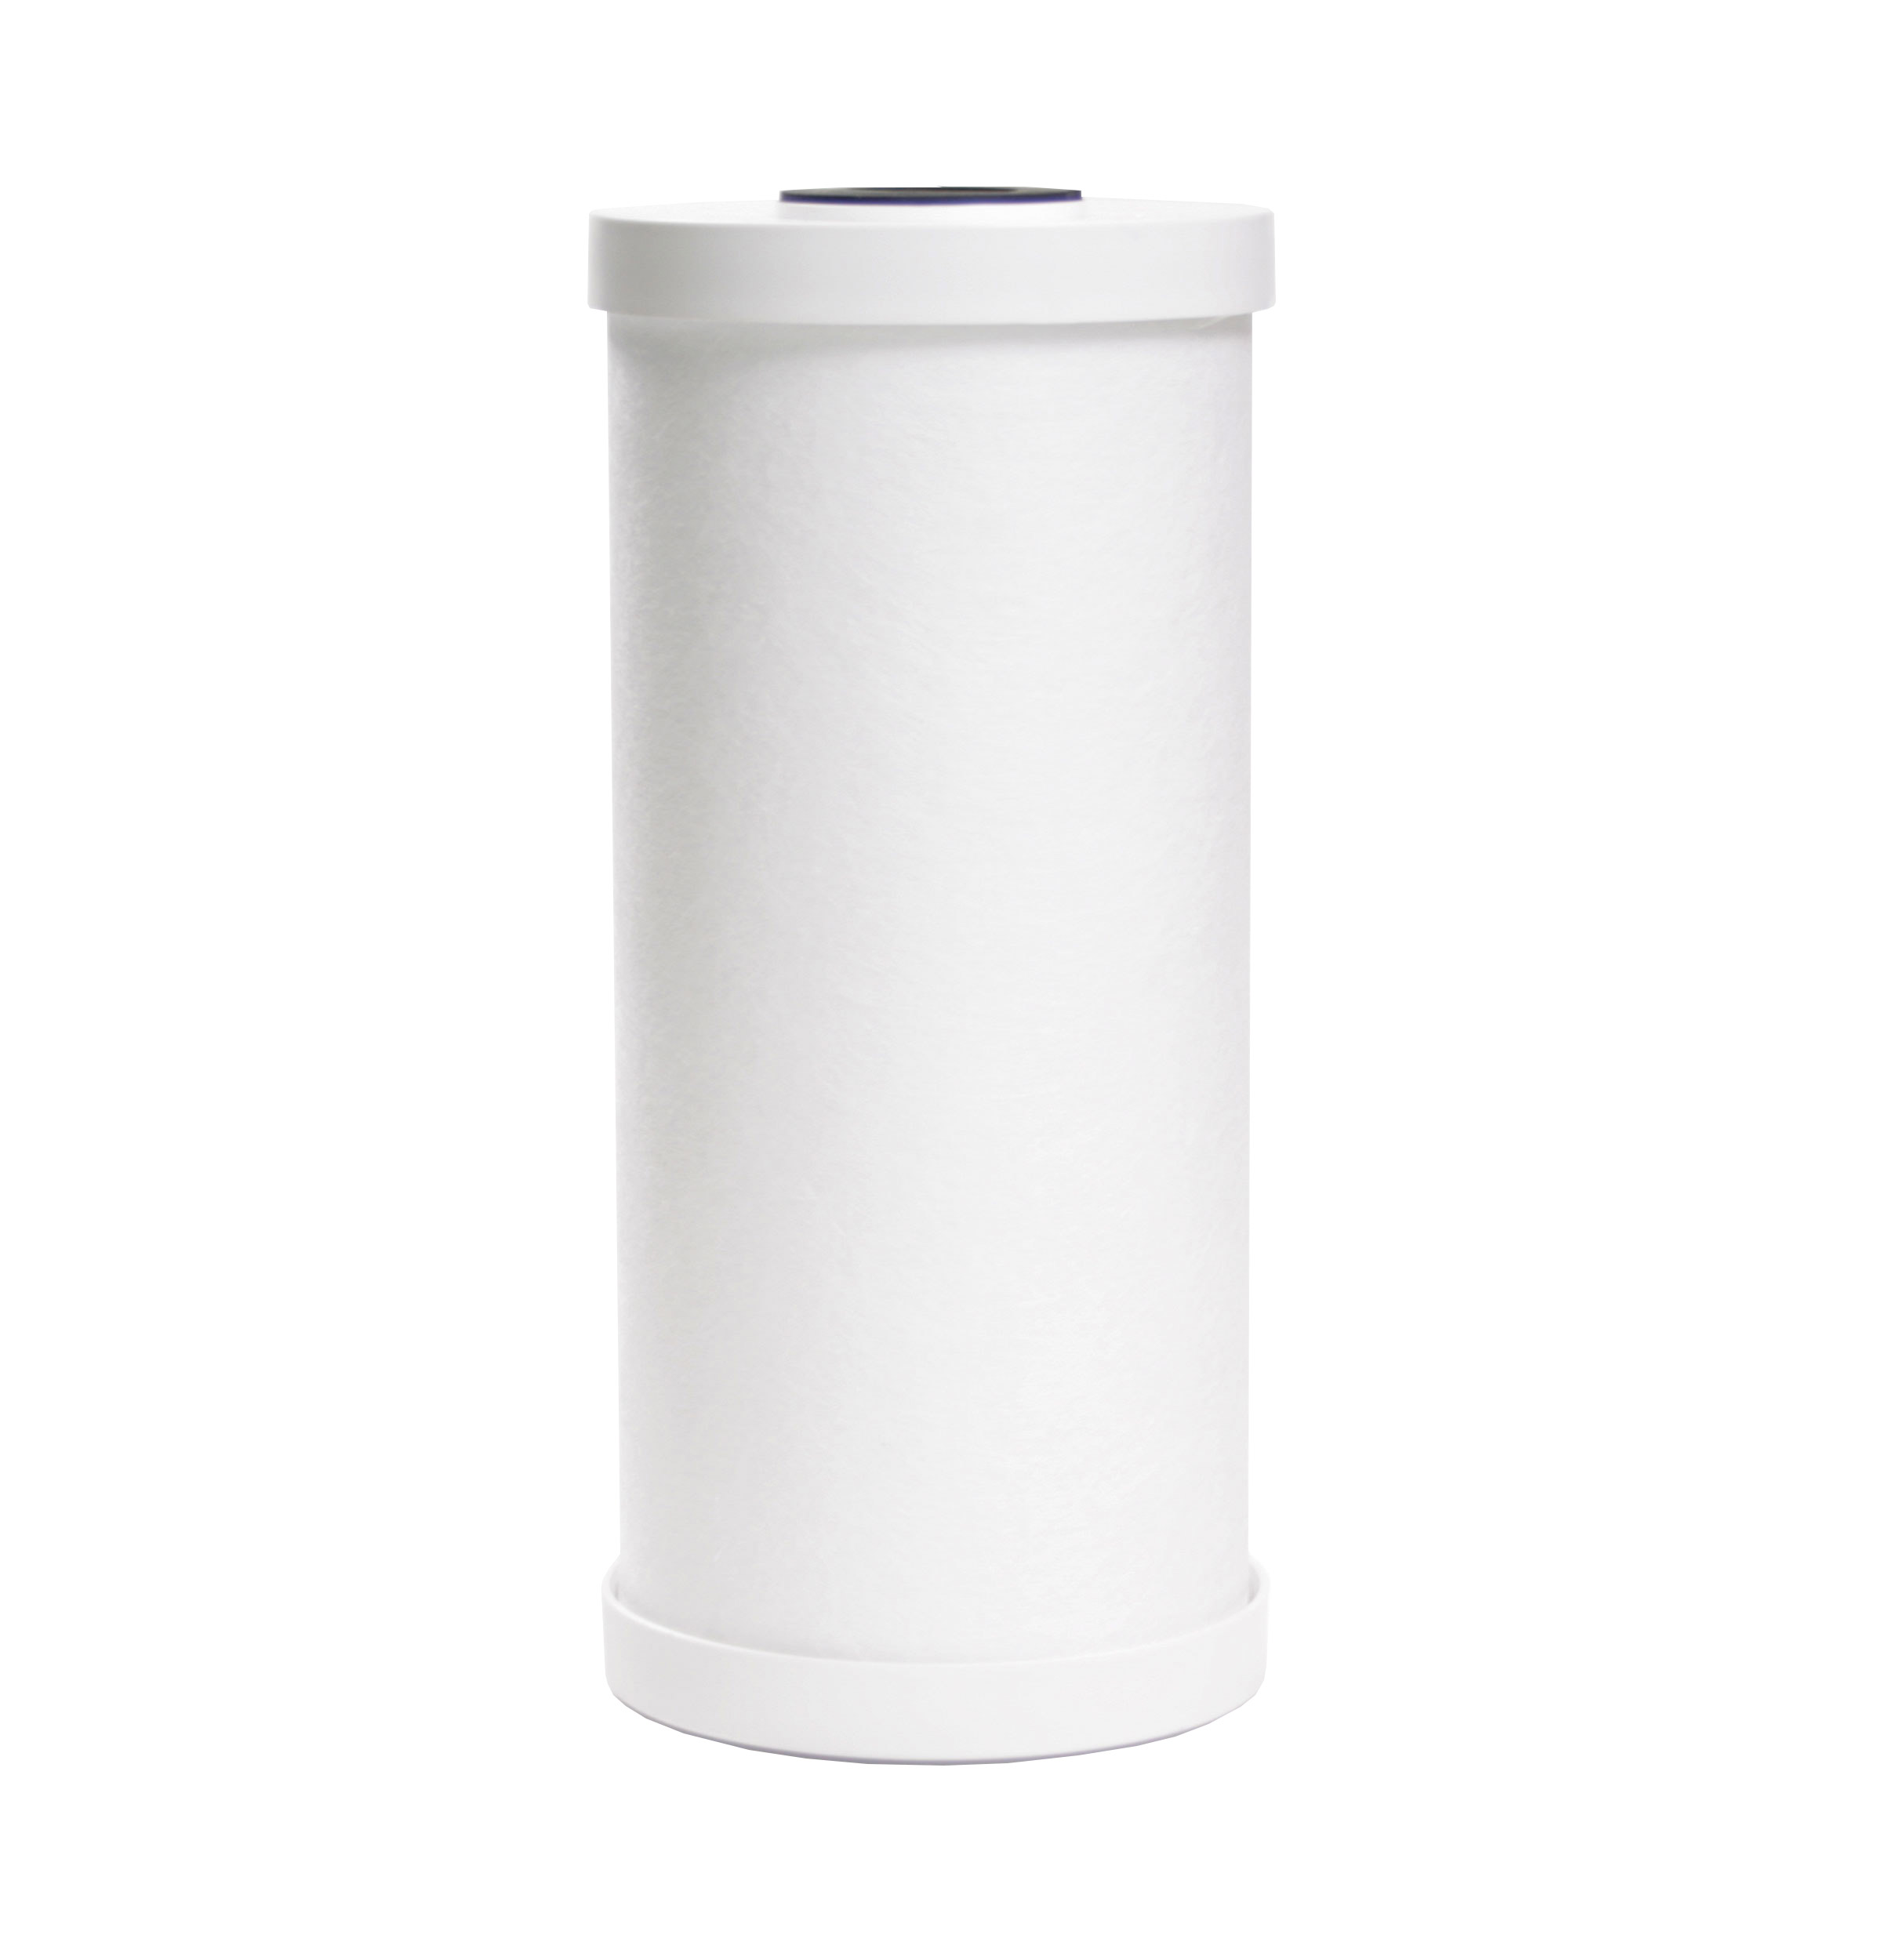 GE WHOLE HOUSE ADVANCED REPLACEMENT WATER FILTER — Model #: FXHTC